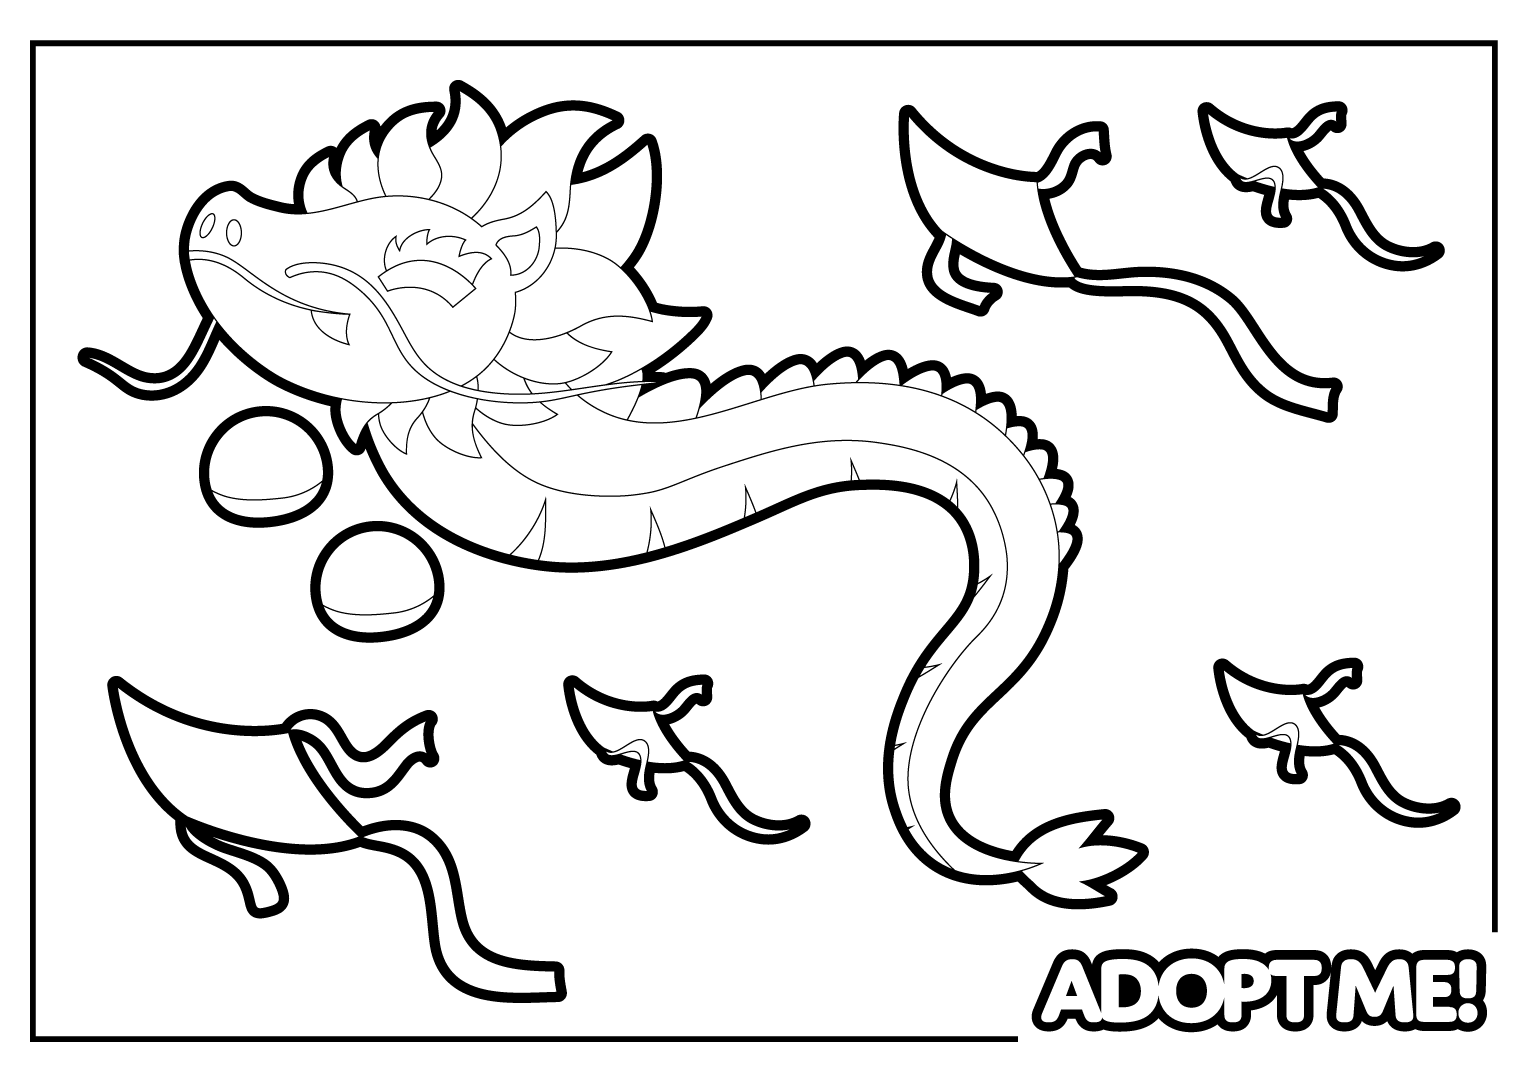 388,794 Cute Colouring Pages Royalty-Free Photos and Stock Images |  Shutterstock